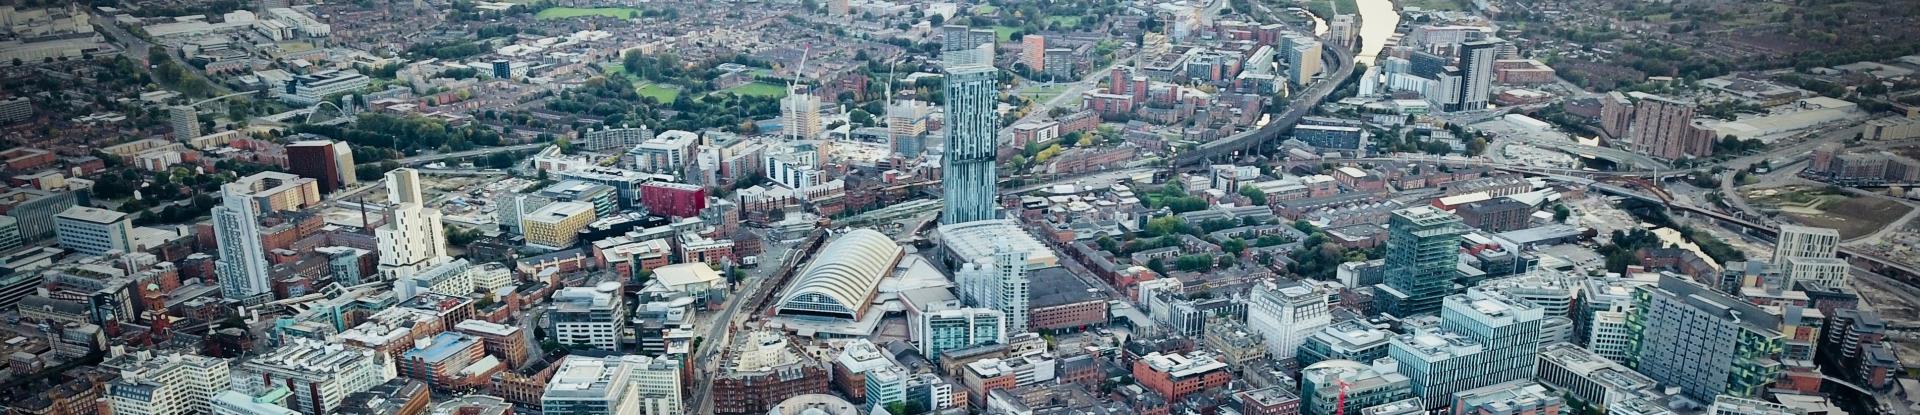 Greater Manchester – a model for resilient urban growth?